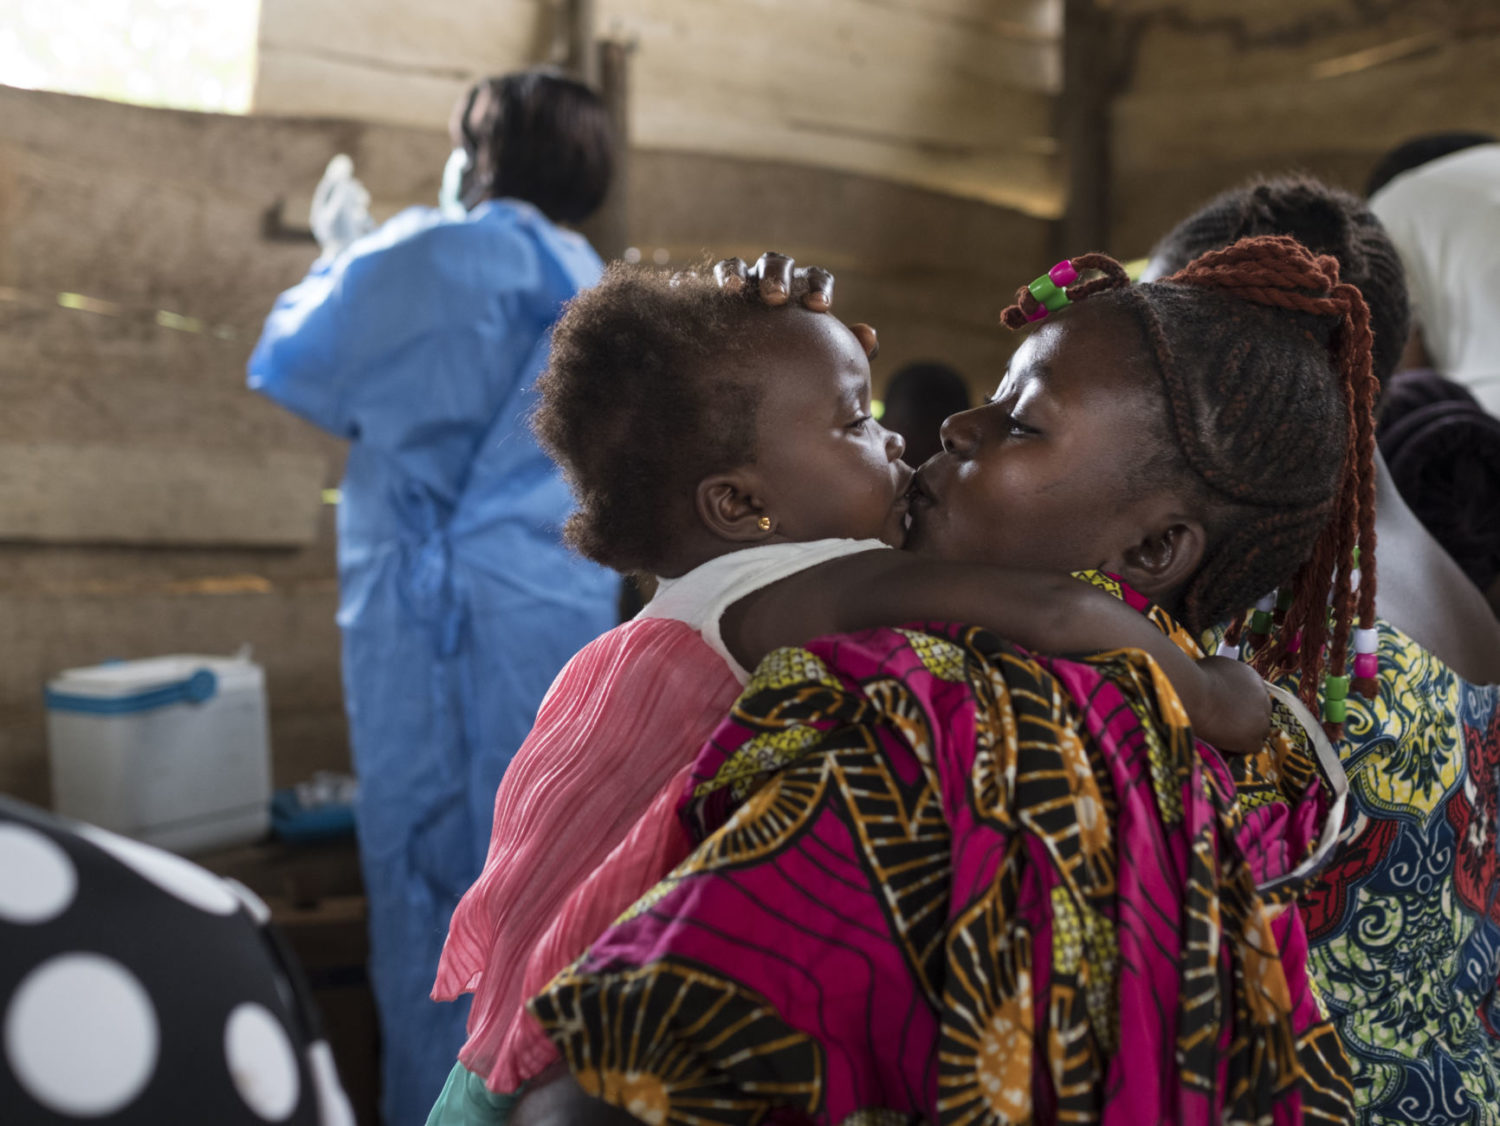 A mother kisses her daughter at a regularly scheduled, UNICEF-supported immunization clinic in the village of Kuka on the outskirts of Beni in North Kivu province, Democratic Republic of the Congo on 21 October 2019. Despite the recent Ebola outbreak and its toll on the community, 80 children have shown up to receive vaccines against a number of diseases, including polio, yellow fever, tetanus and diphtheria. UNICEF provides the vaccines, cold storage and transport for the health workers, in addition to logistical and technical support.